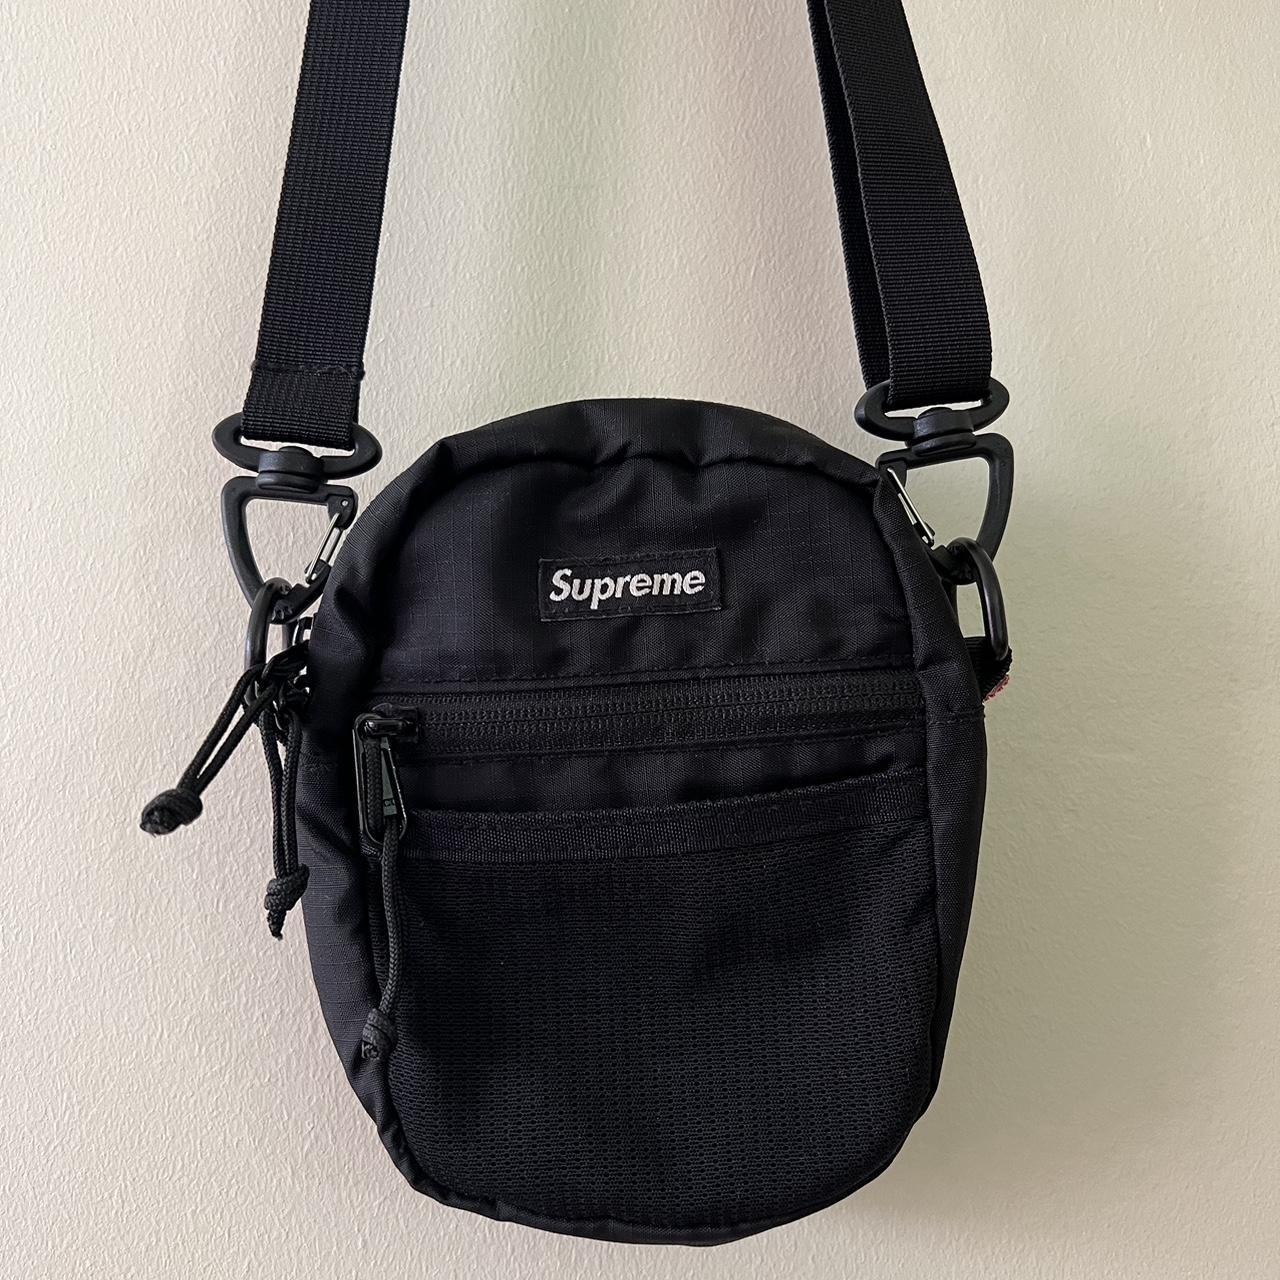 Supreme SS17 Shoulder Bag, No flaws, great condition....